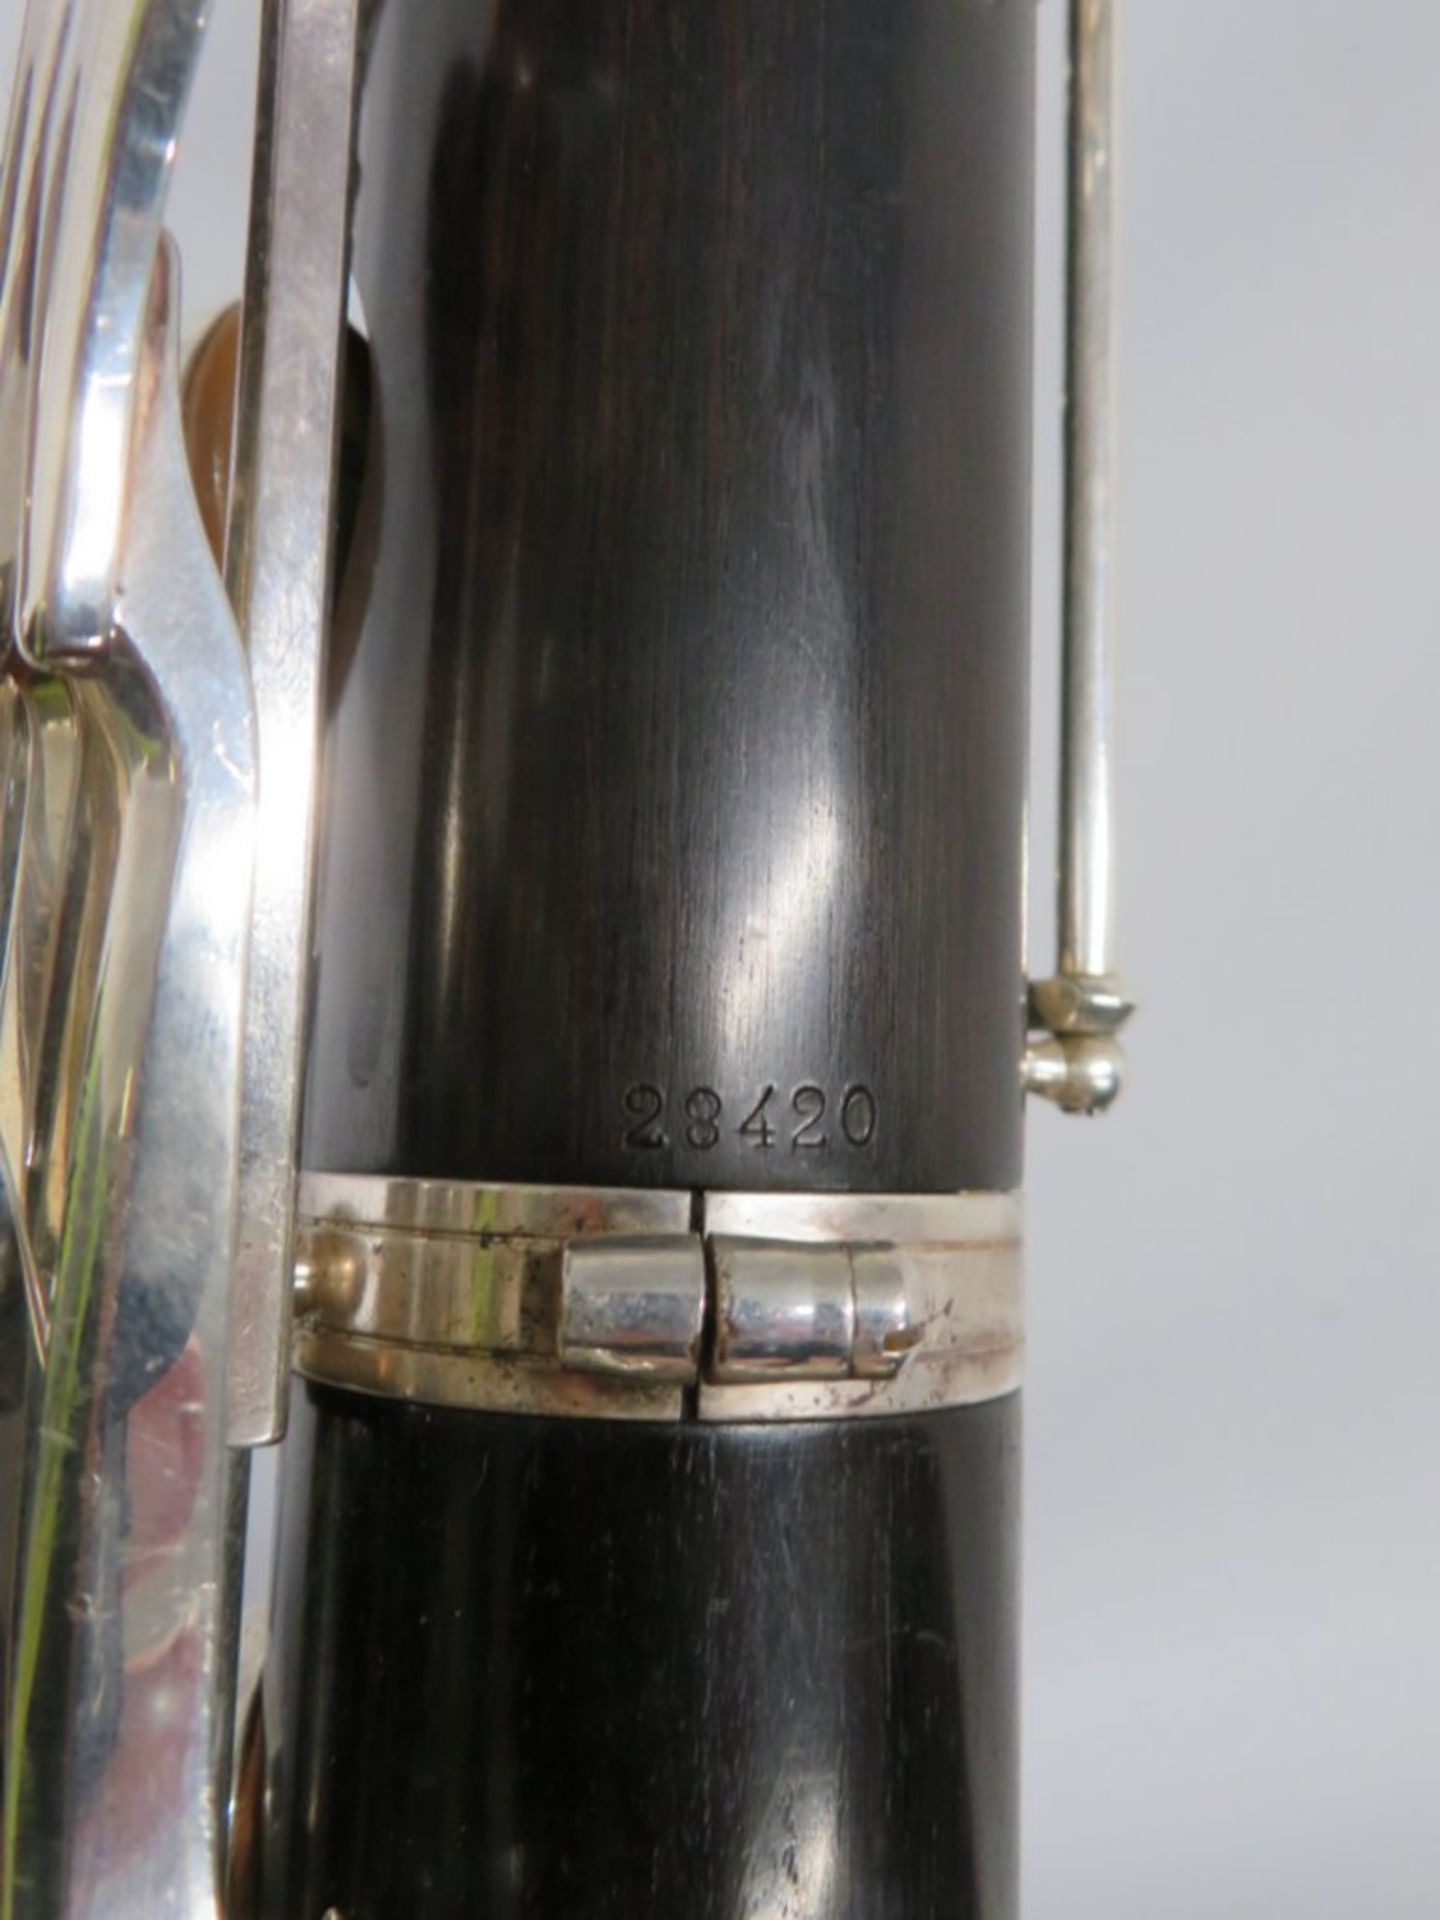 Buffet Crampon Prestige Bass Clarinet Complete With Case. - Image 16 of 20